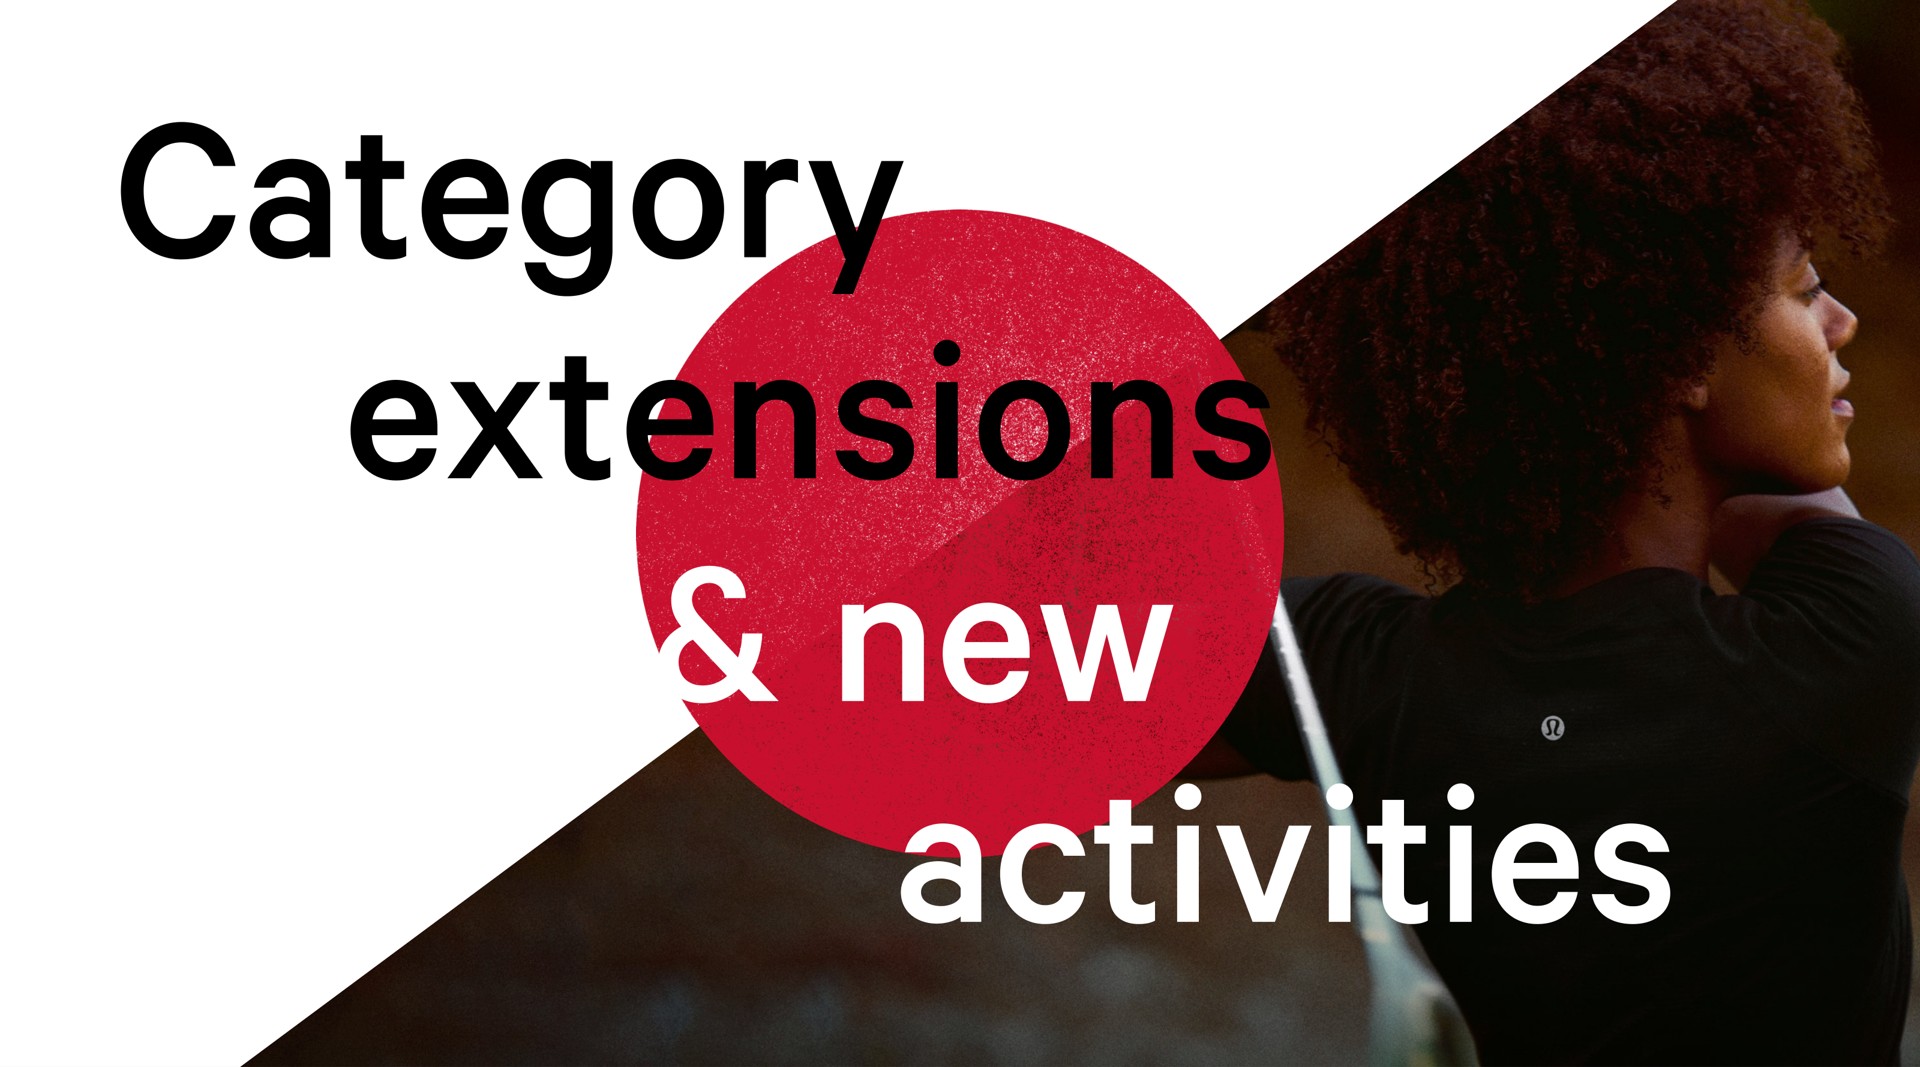 category extensions new activities | Lululemon